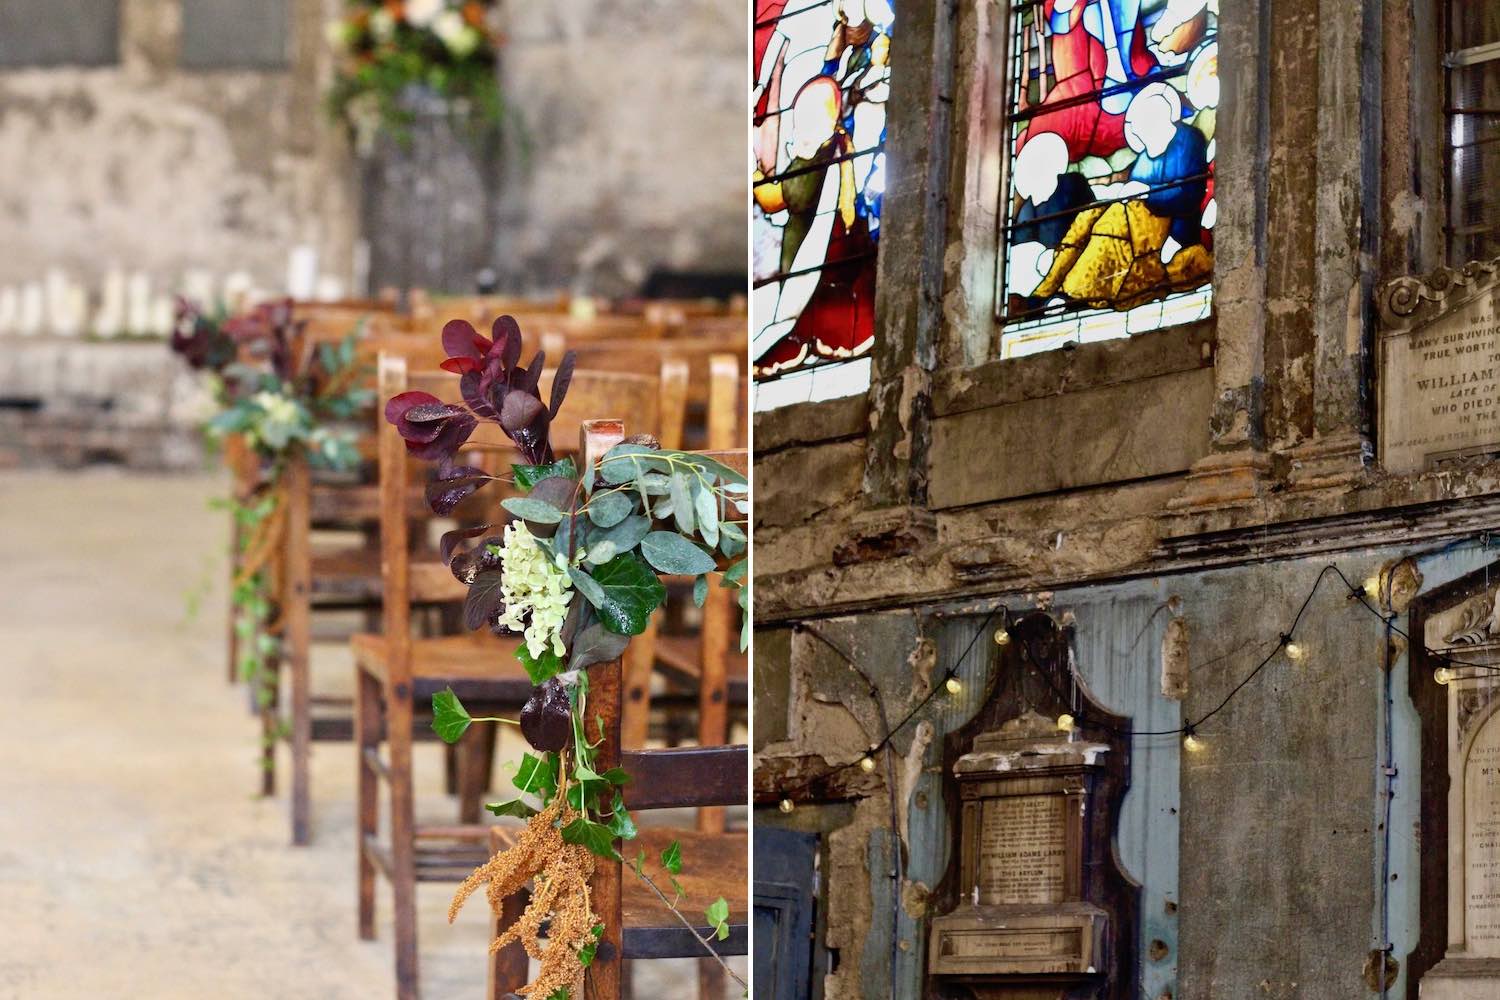 Wedding aisle chairs with flower decorations in Asylum chapel